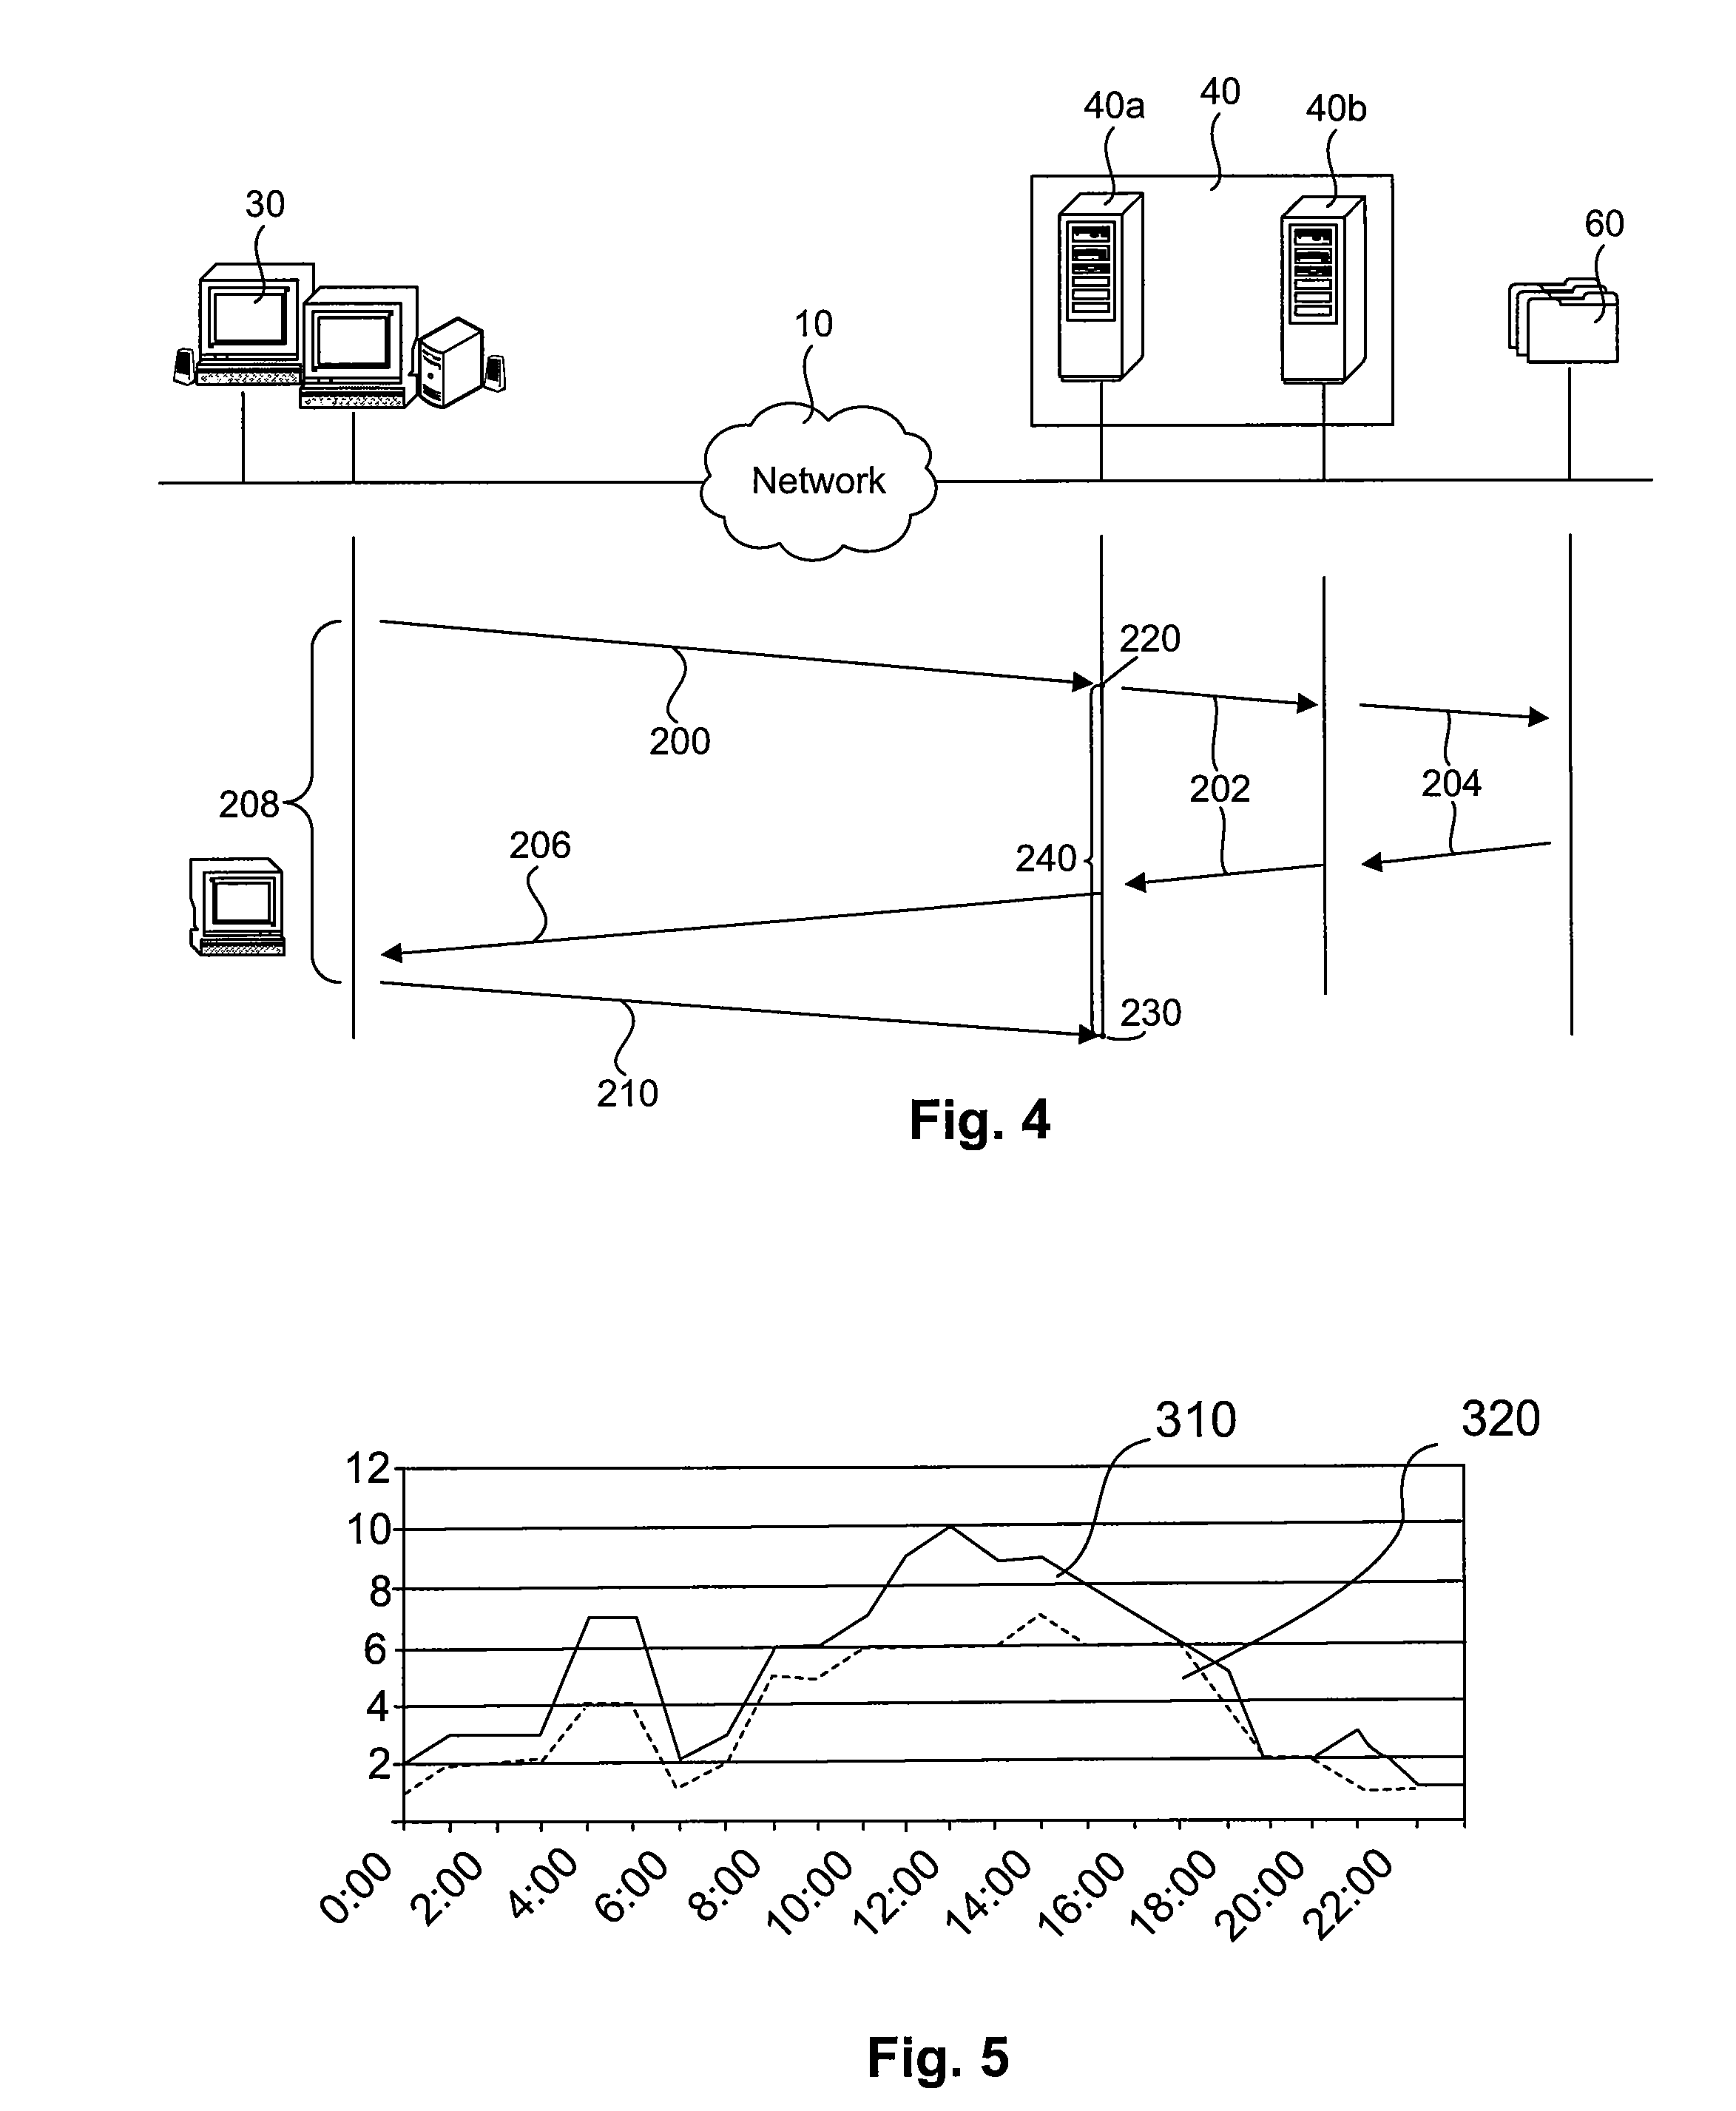 Method and system for monitoring performance of a client-server architecture